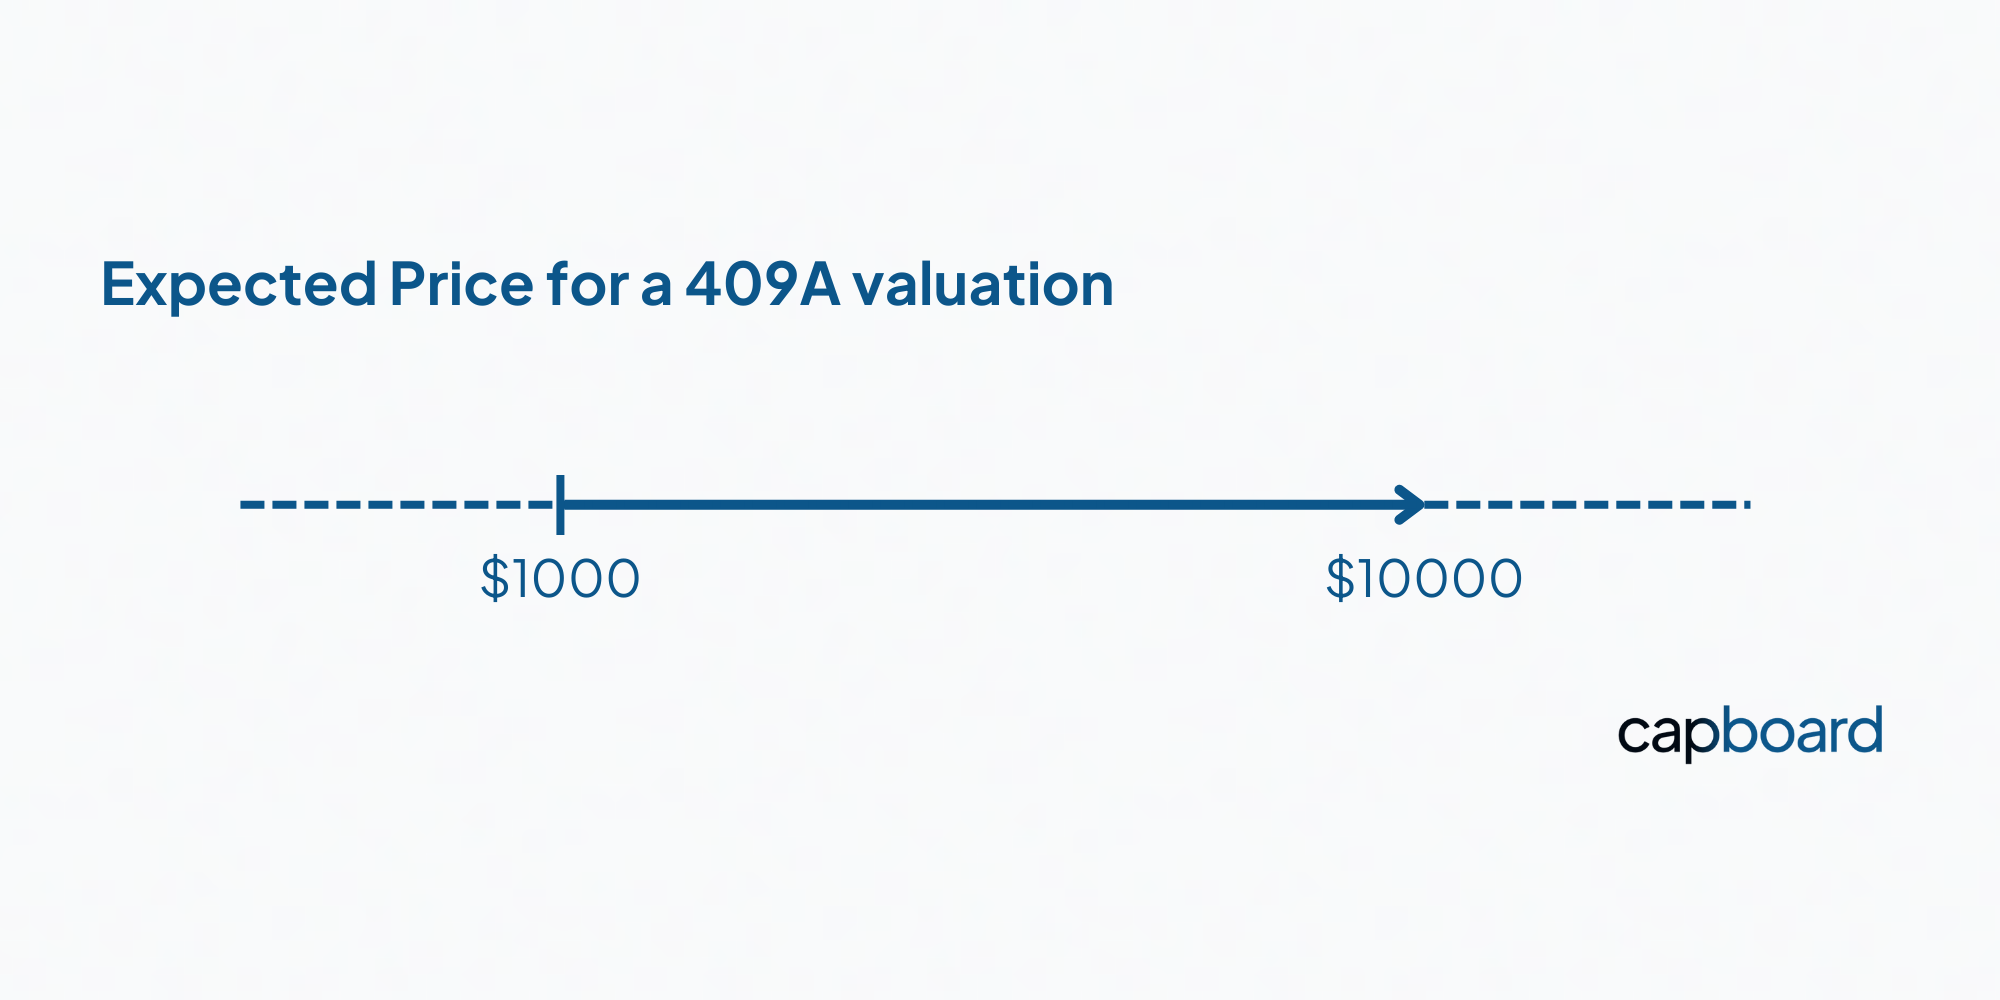 The expected price of a 409A valuation is between $1000 and $10000. 